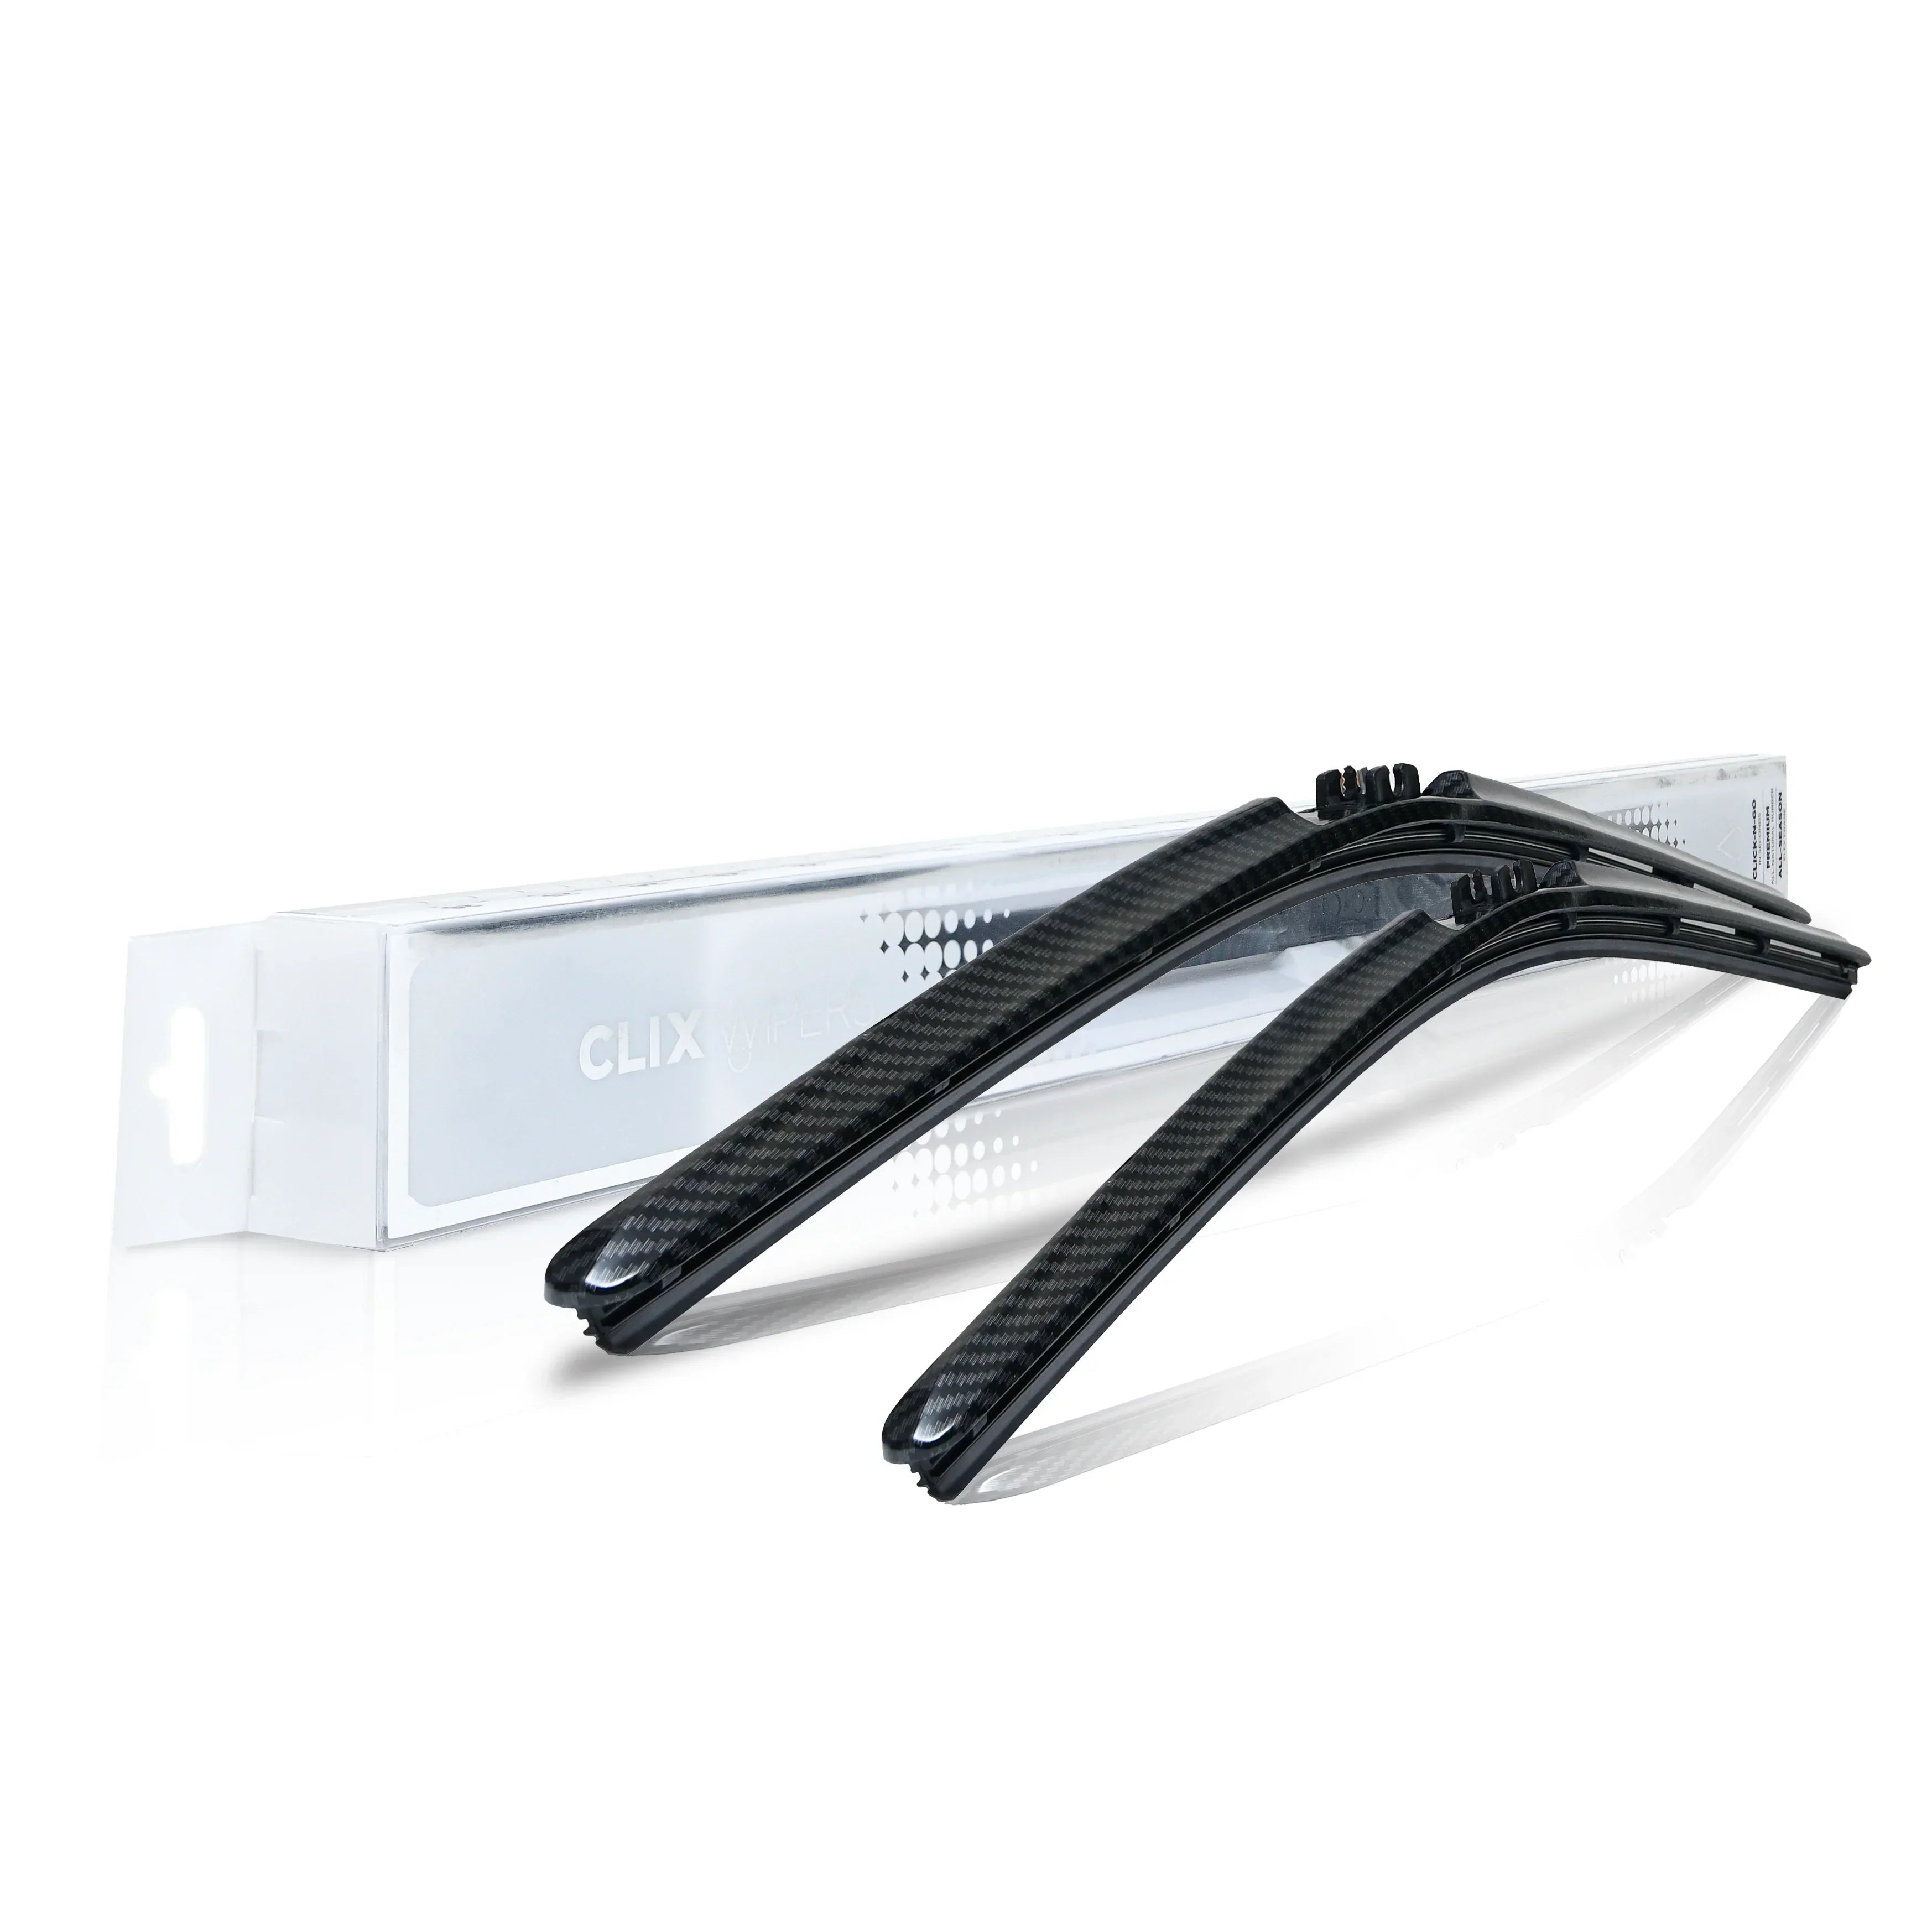 Volkswagen Beetle 2004-2010 4S Professional Teflon Silicone Series Wiper  Blades (1 pair) - Car accessories